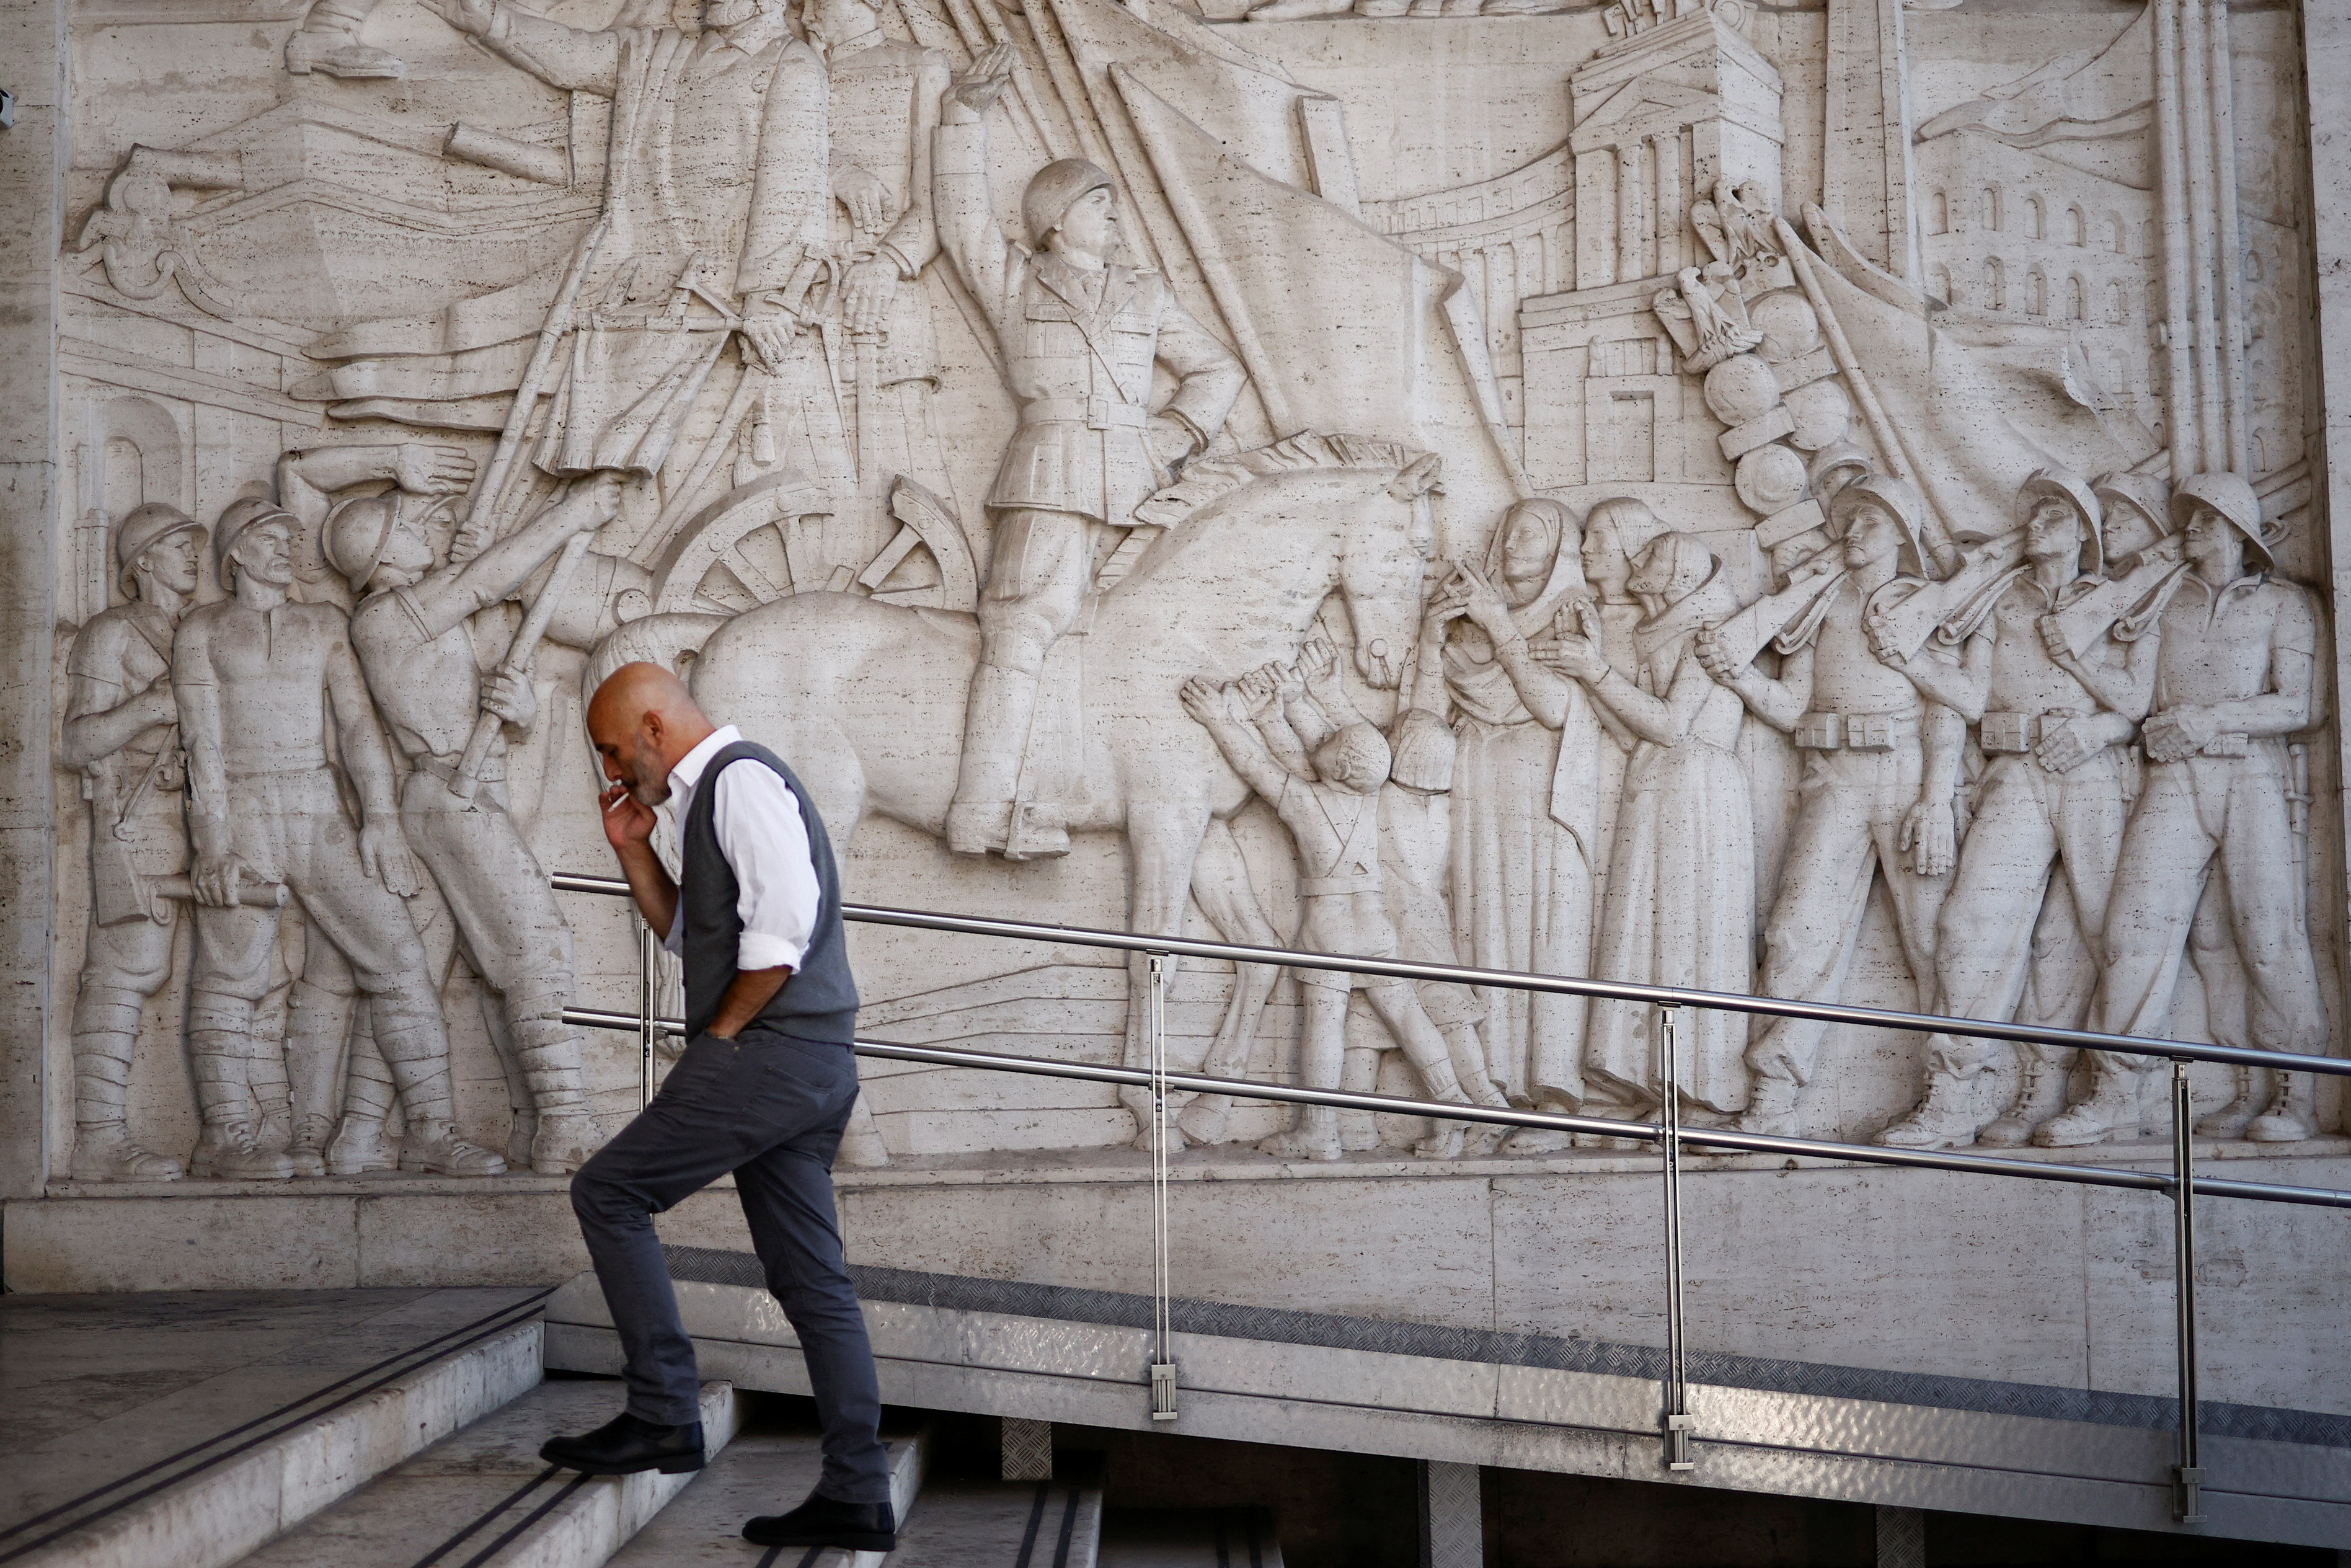 Mussolini's image hangs over Rome 100 years after he grabbed power